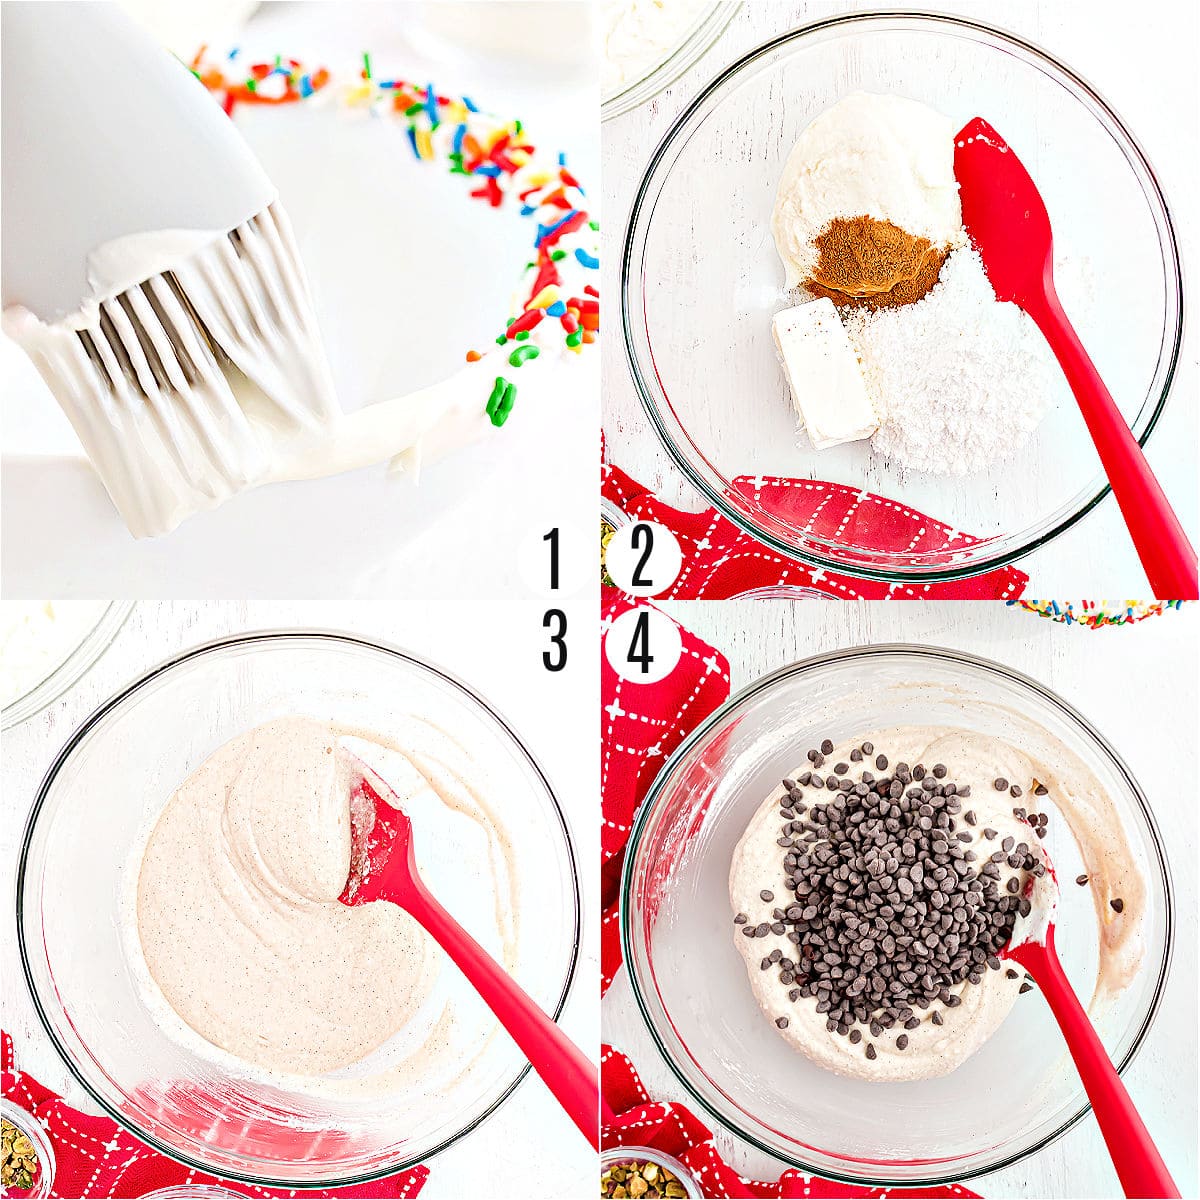 Step by step photos showing how to make cannoli dip.